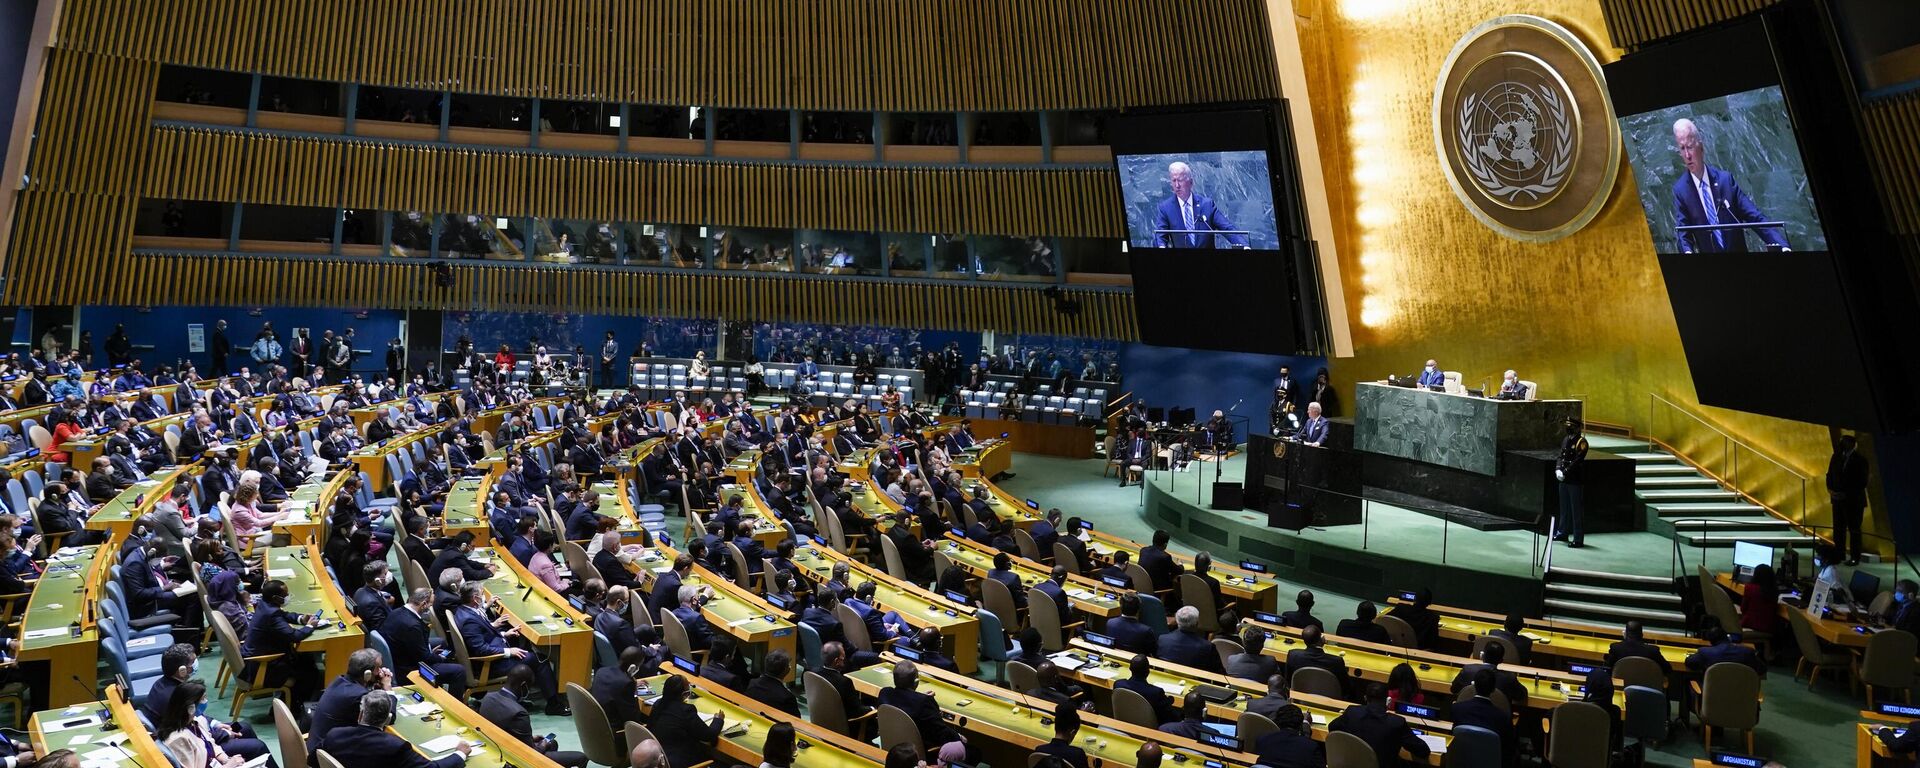 President Joe Biden delivers remarks to the 76th Session of the United Nations General Assembly, Tuesday, Sept. 21, 2021, in New York - Sputnik International, 1920, 21.05.2024